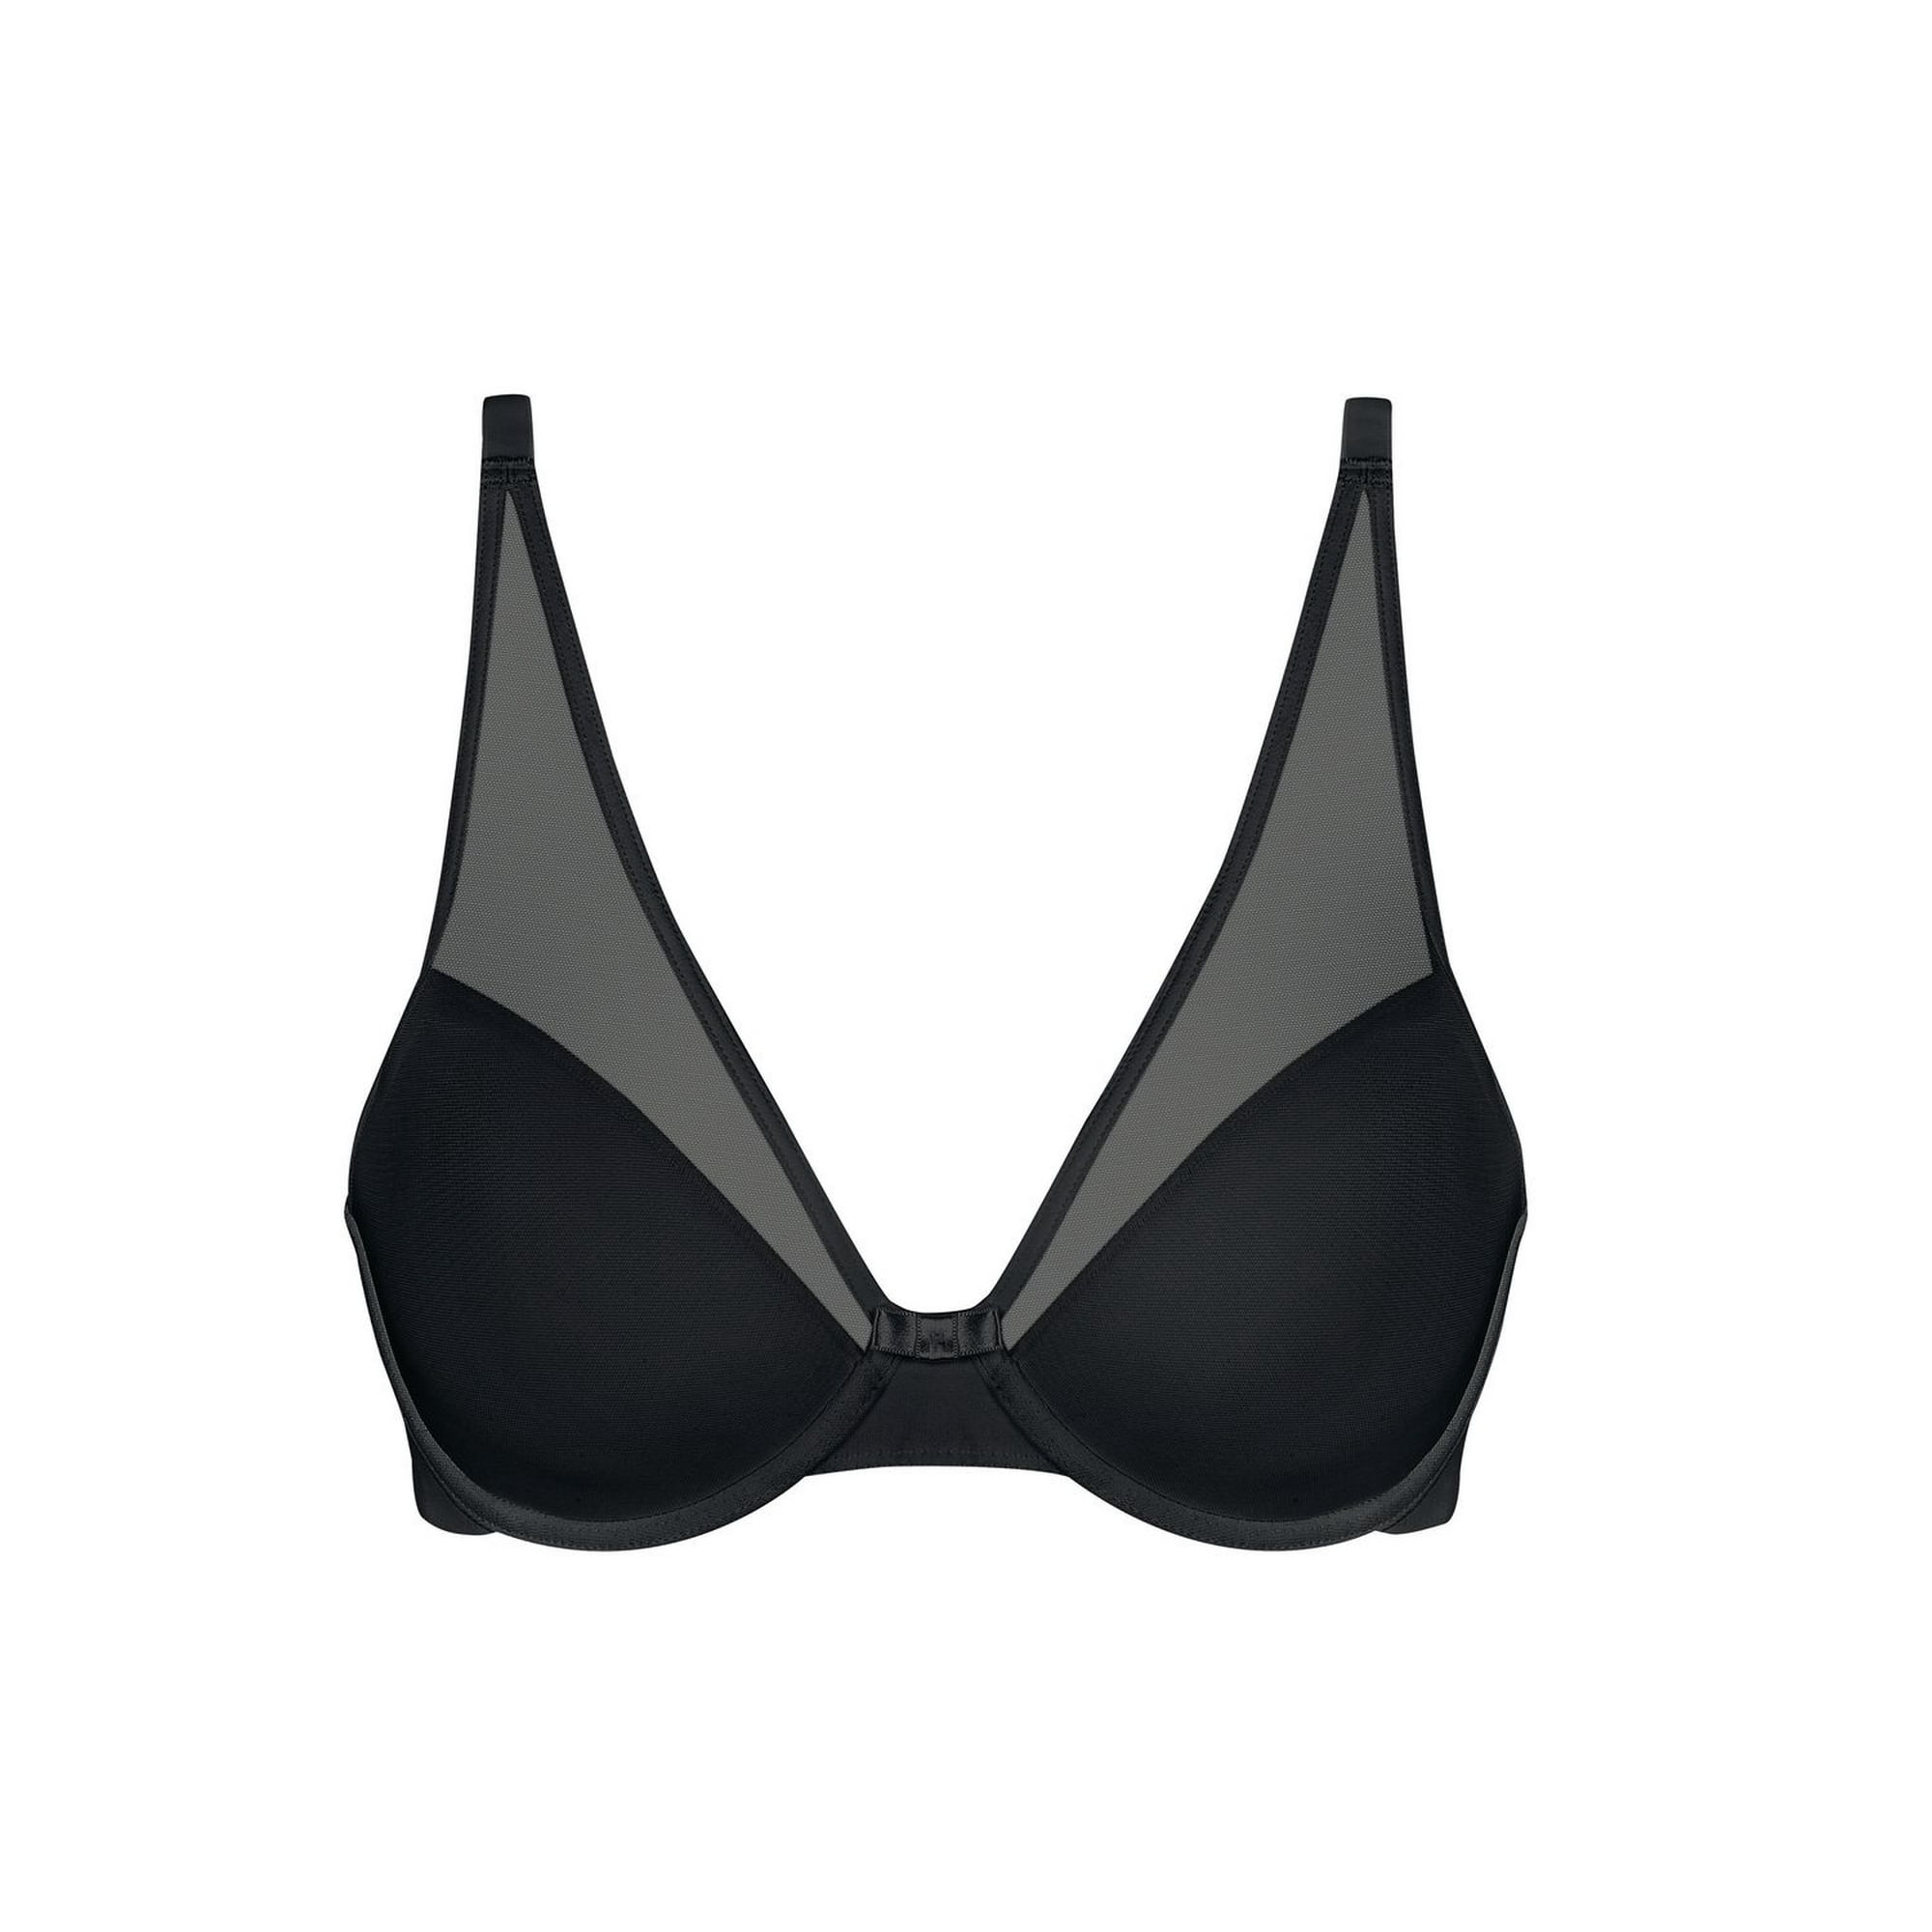 Pact Black Soft Triangle Bra in Size Large